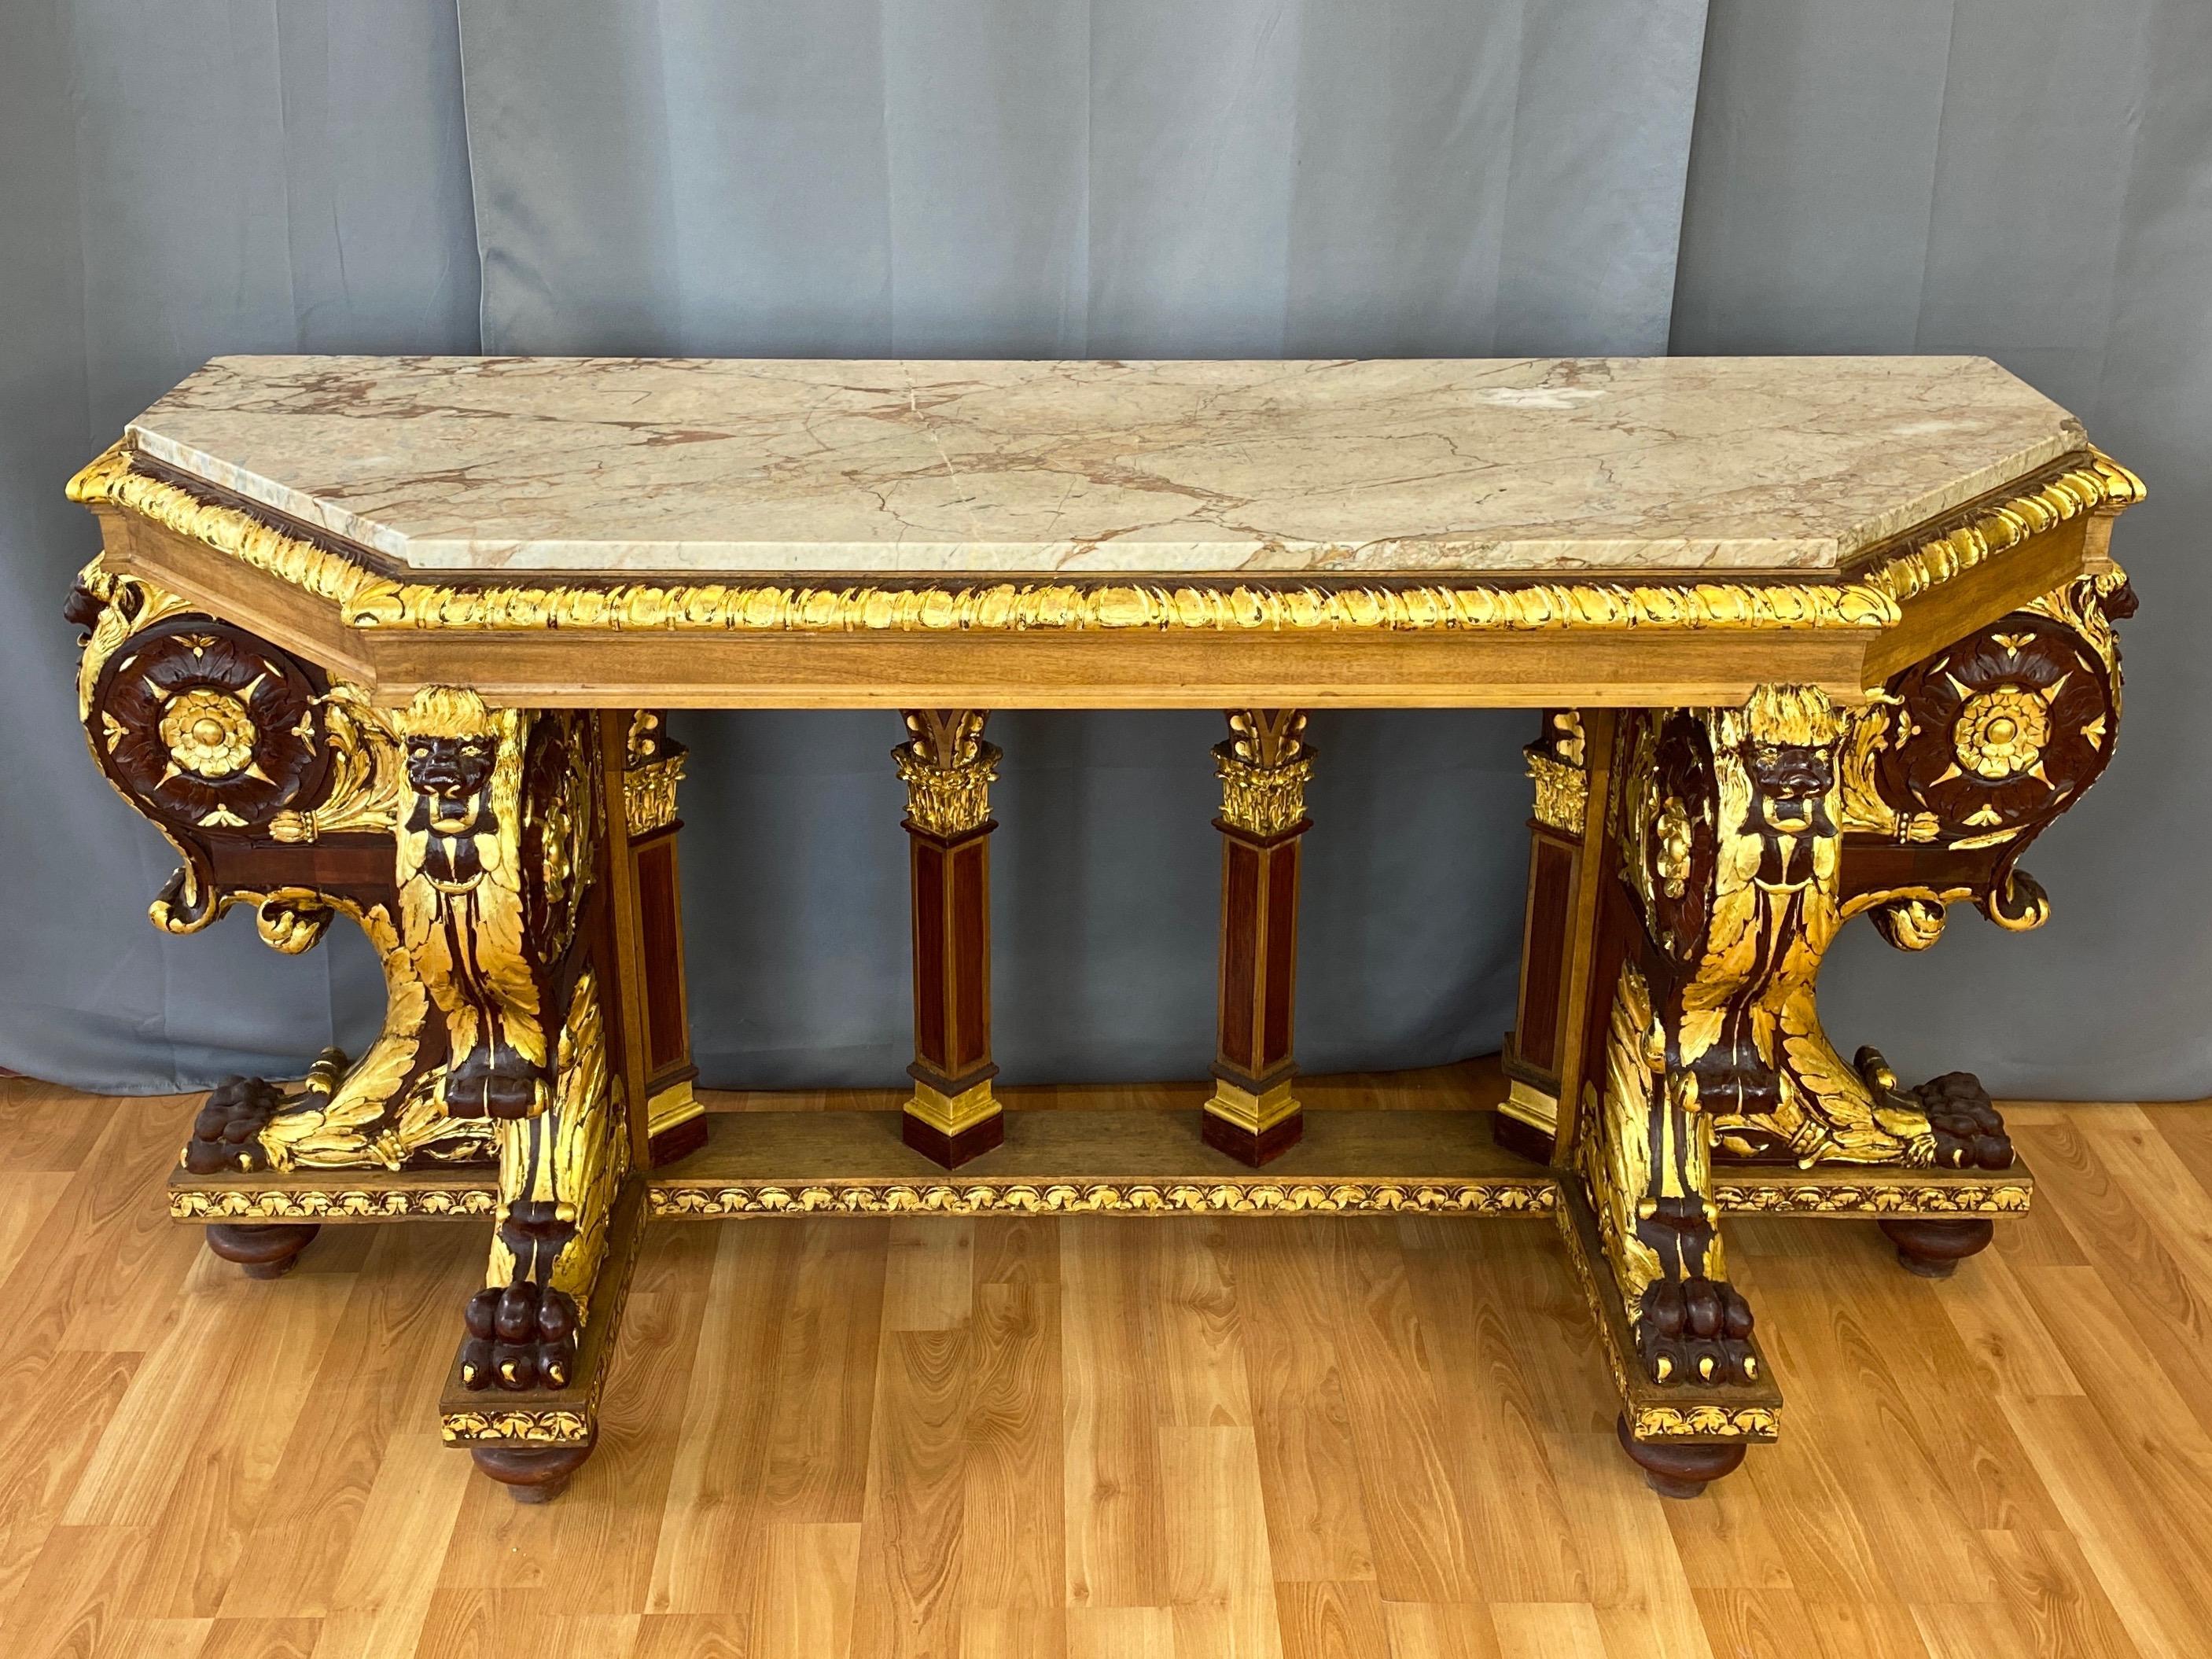 Regency Giltwood Marble Top Console Table, San Francisco Fairmont Hotel, Early 1900s